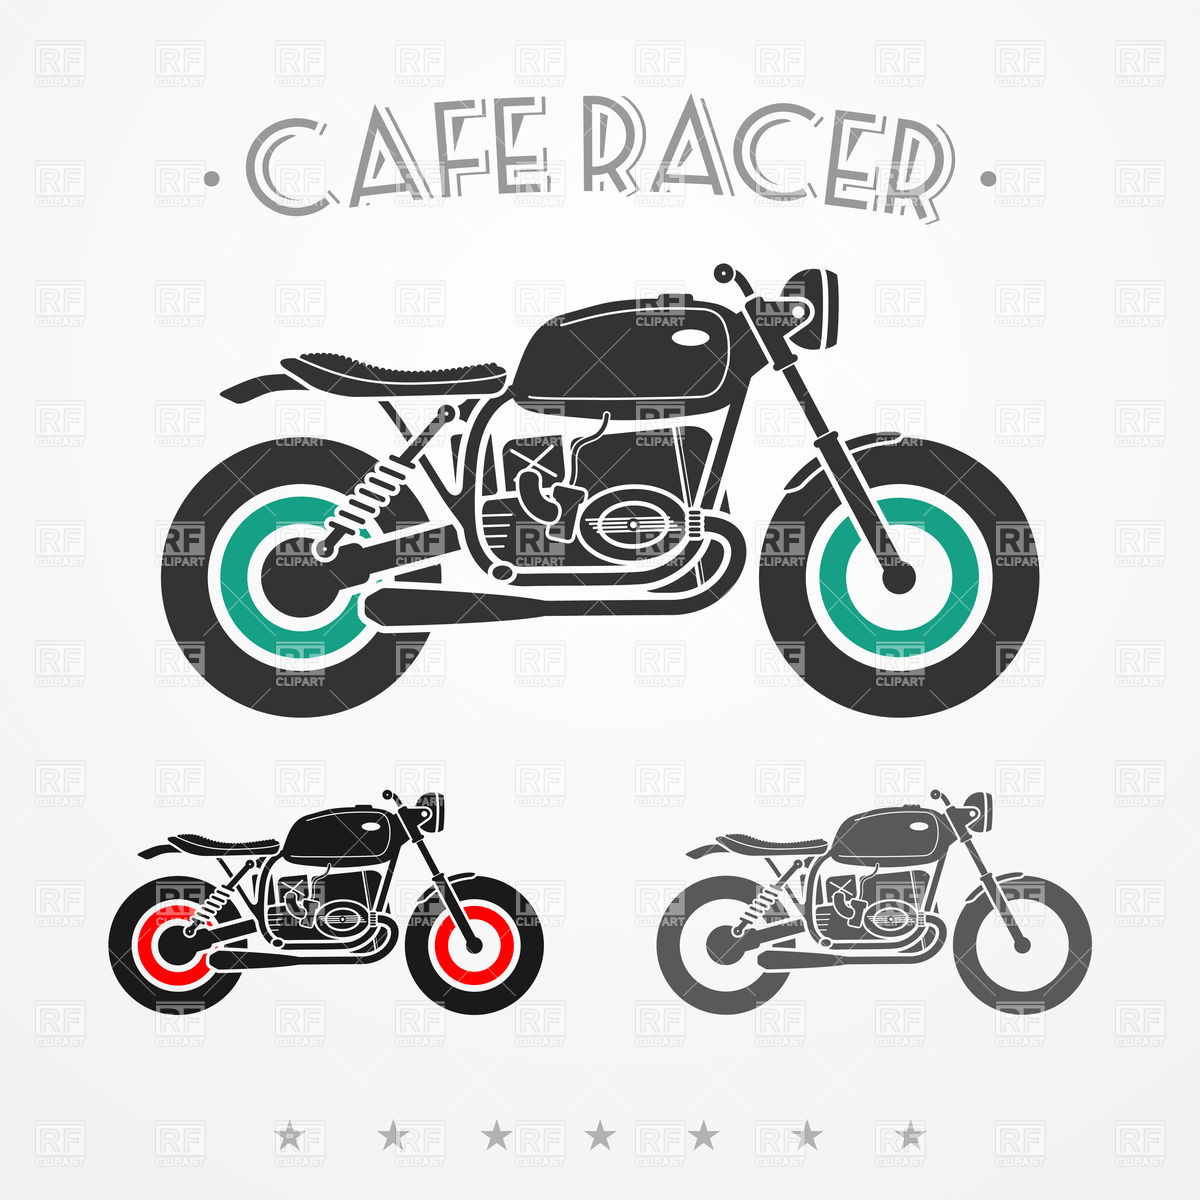 Vintage Flat Looking Motorcycles Download Royalty Free Vector Clipart